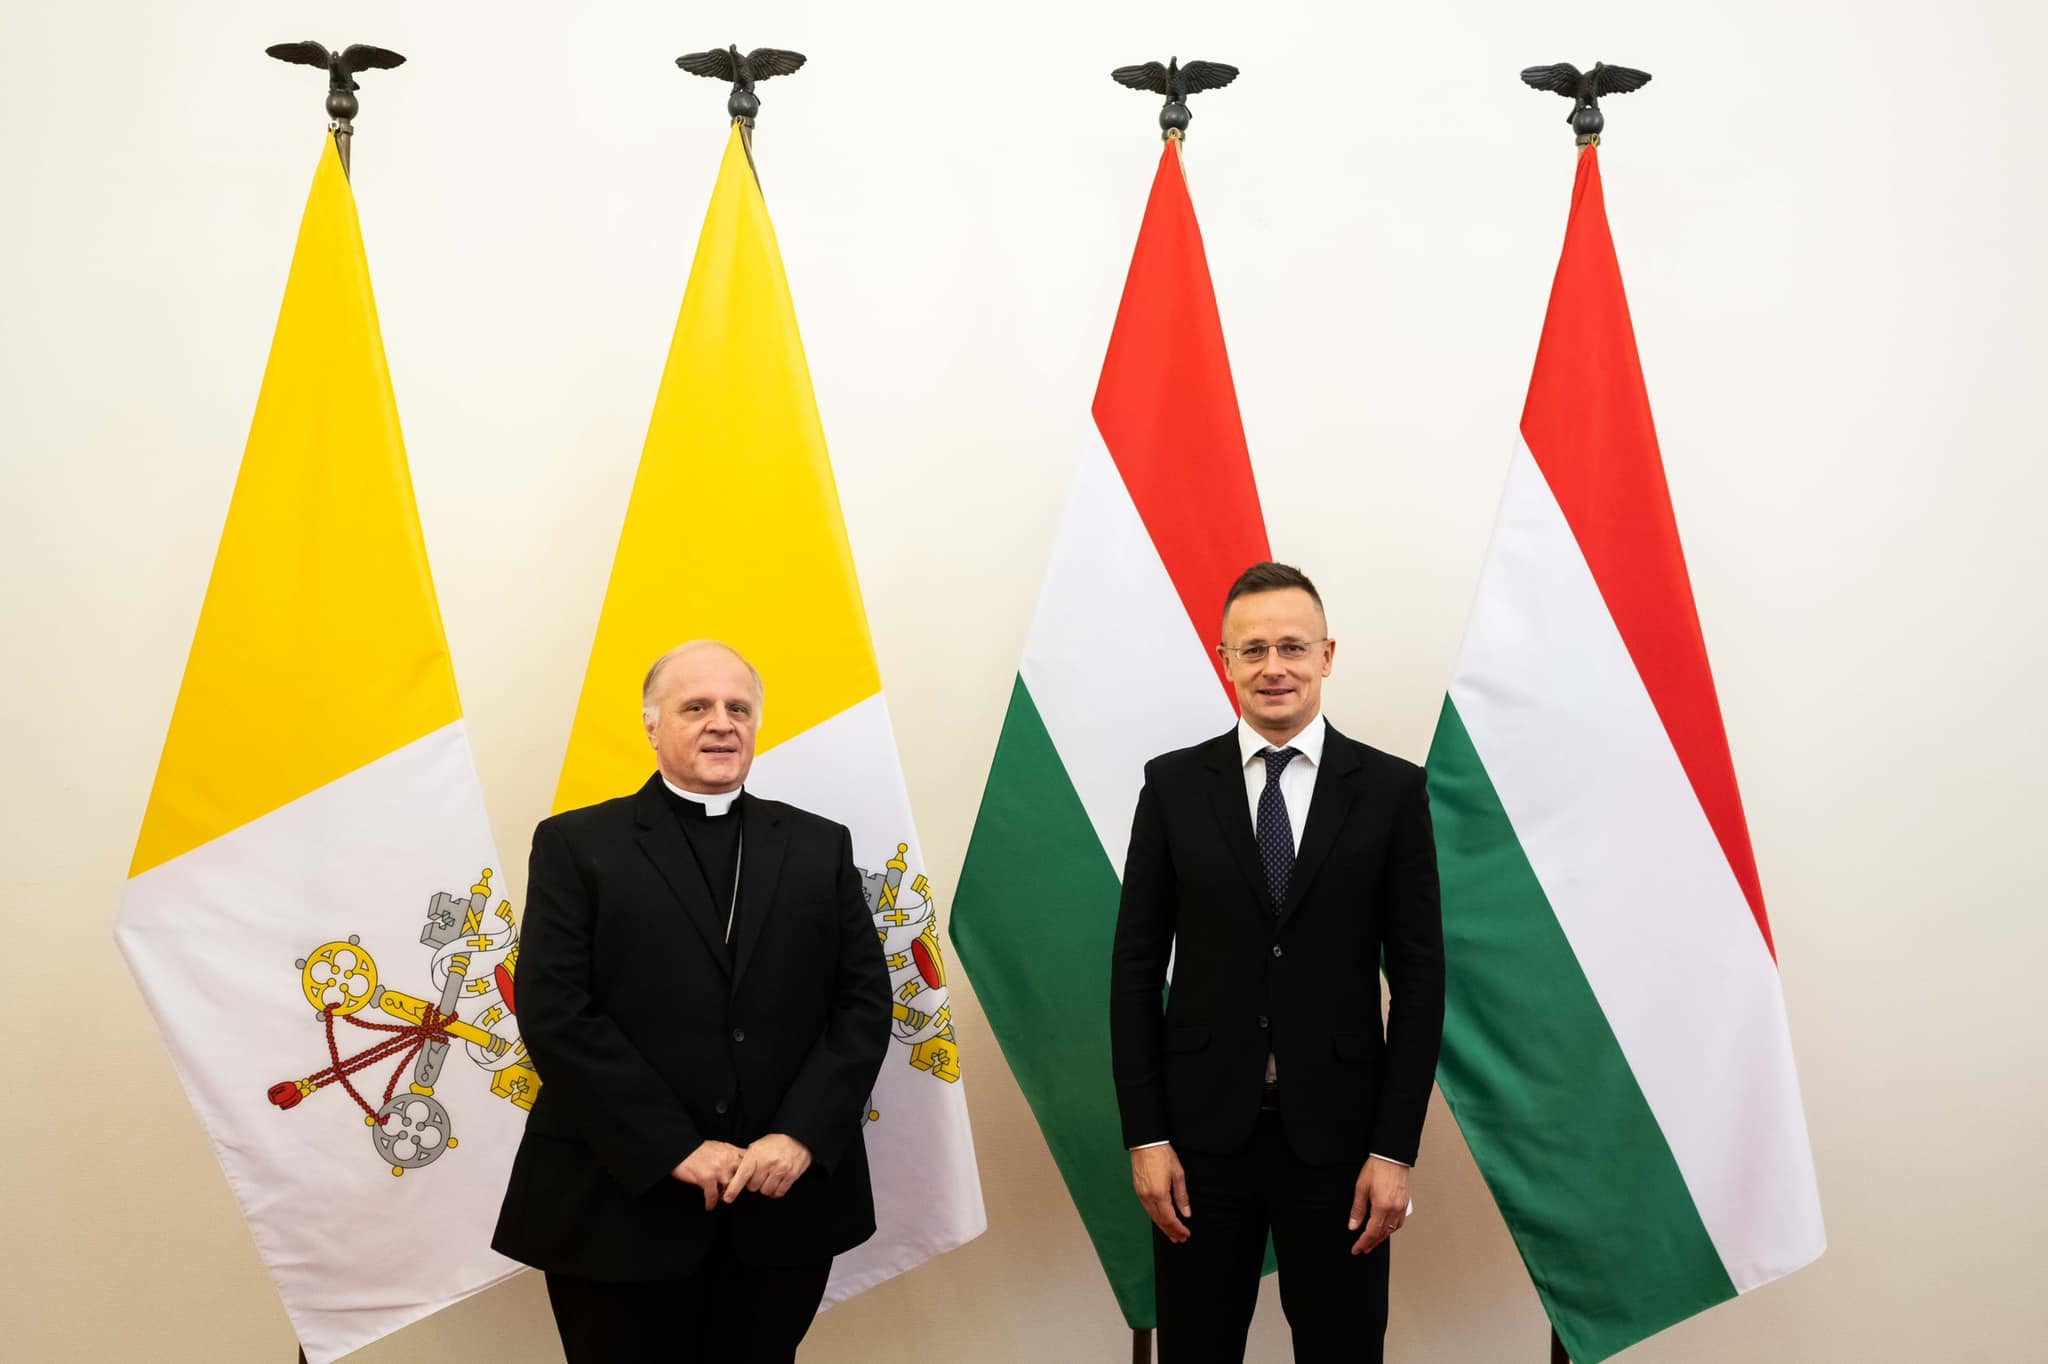 Holy See, Germany Assign New Ambassadors to Serve in Hungary